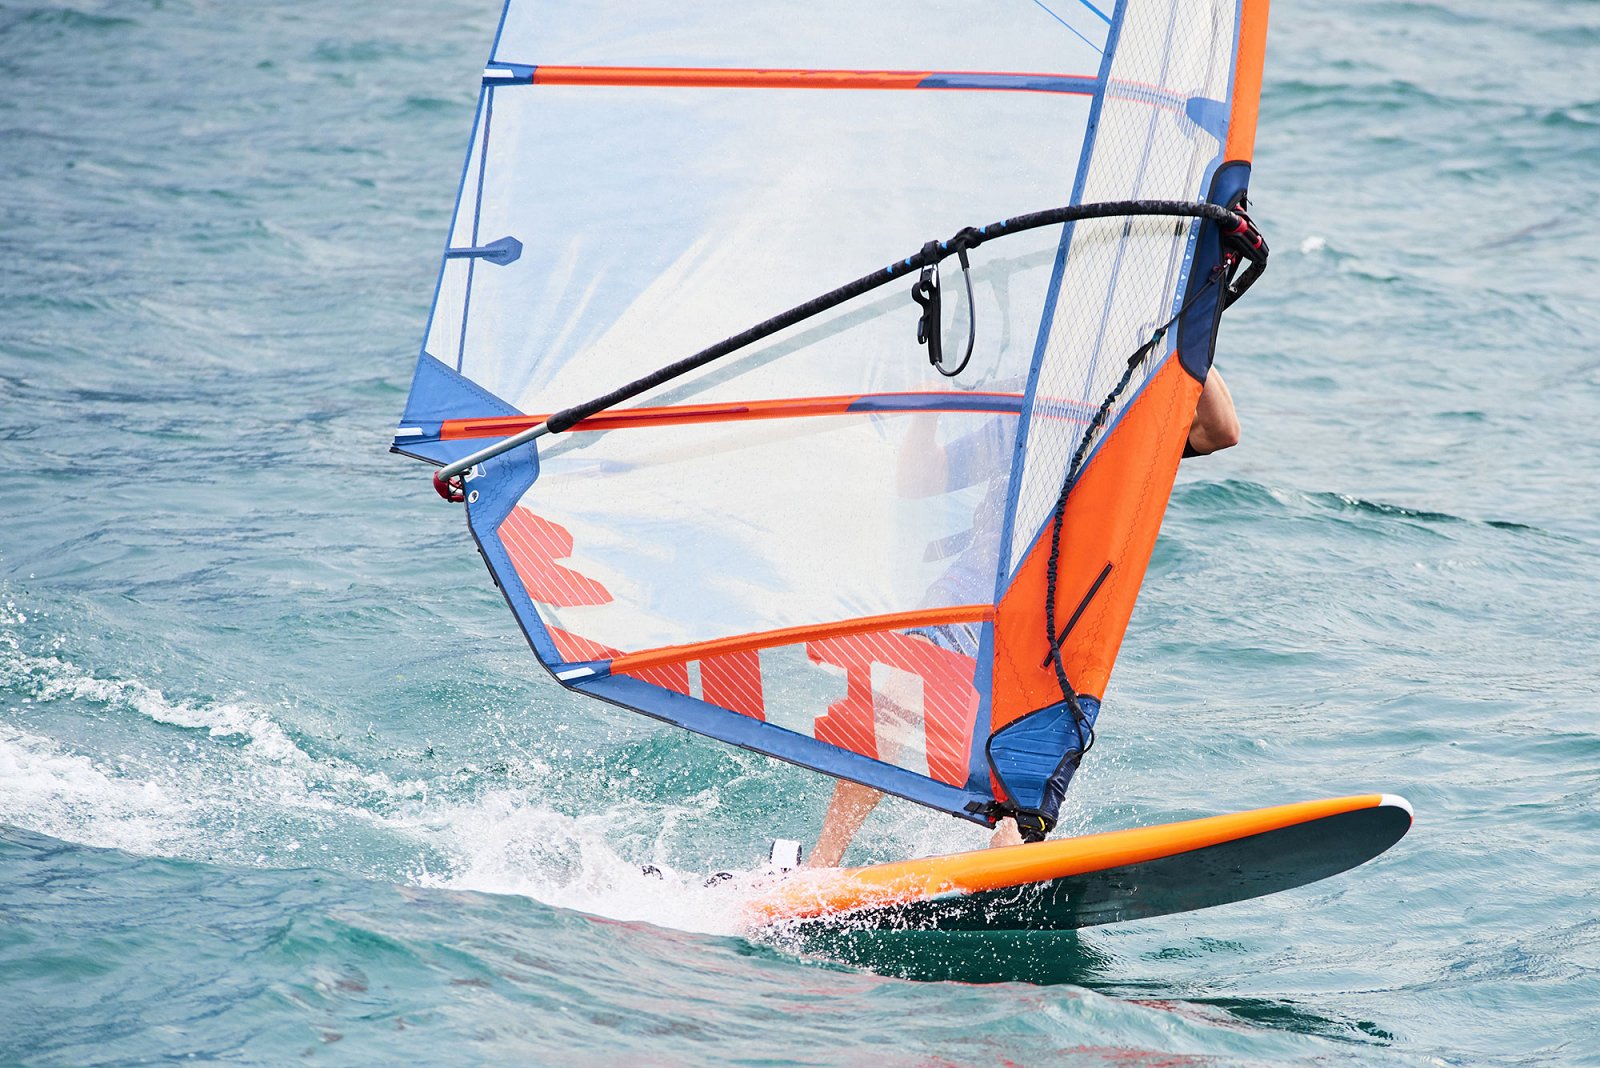 Windsurfing lessons during a holiday in Brenzone at Lake Garda